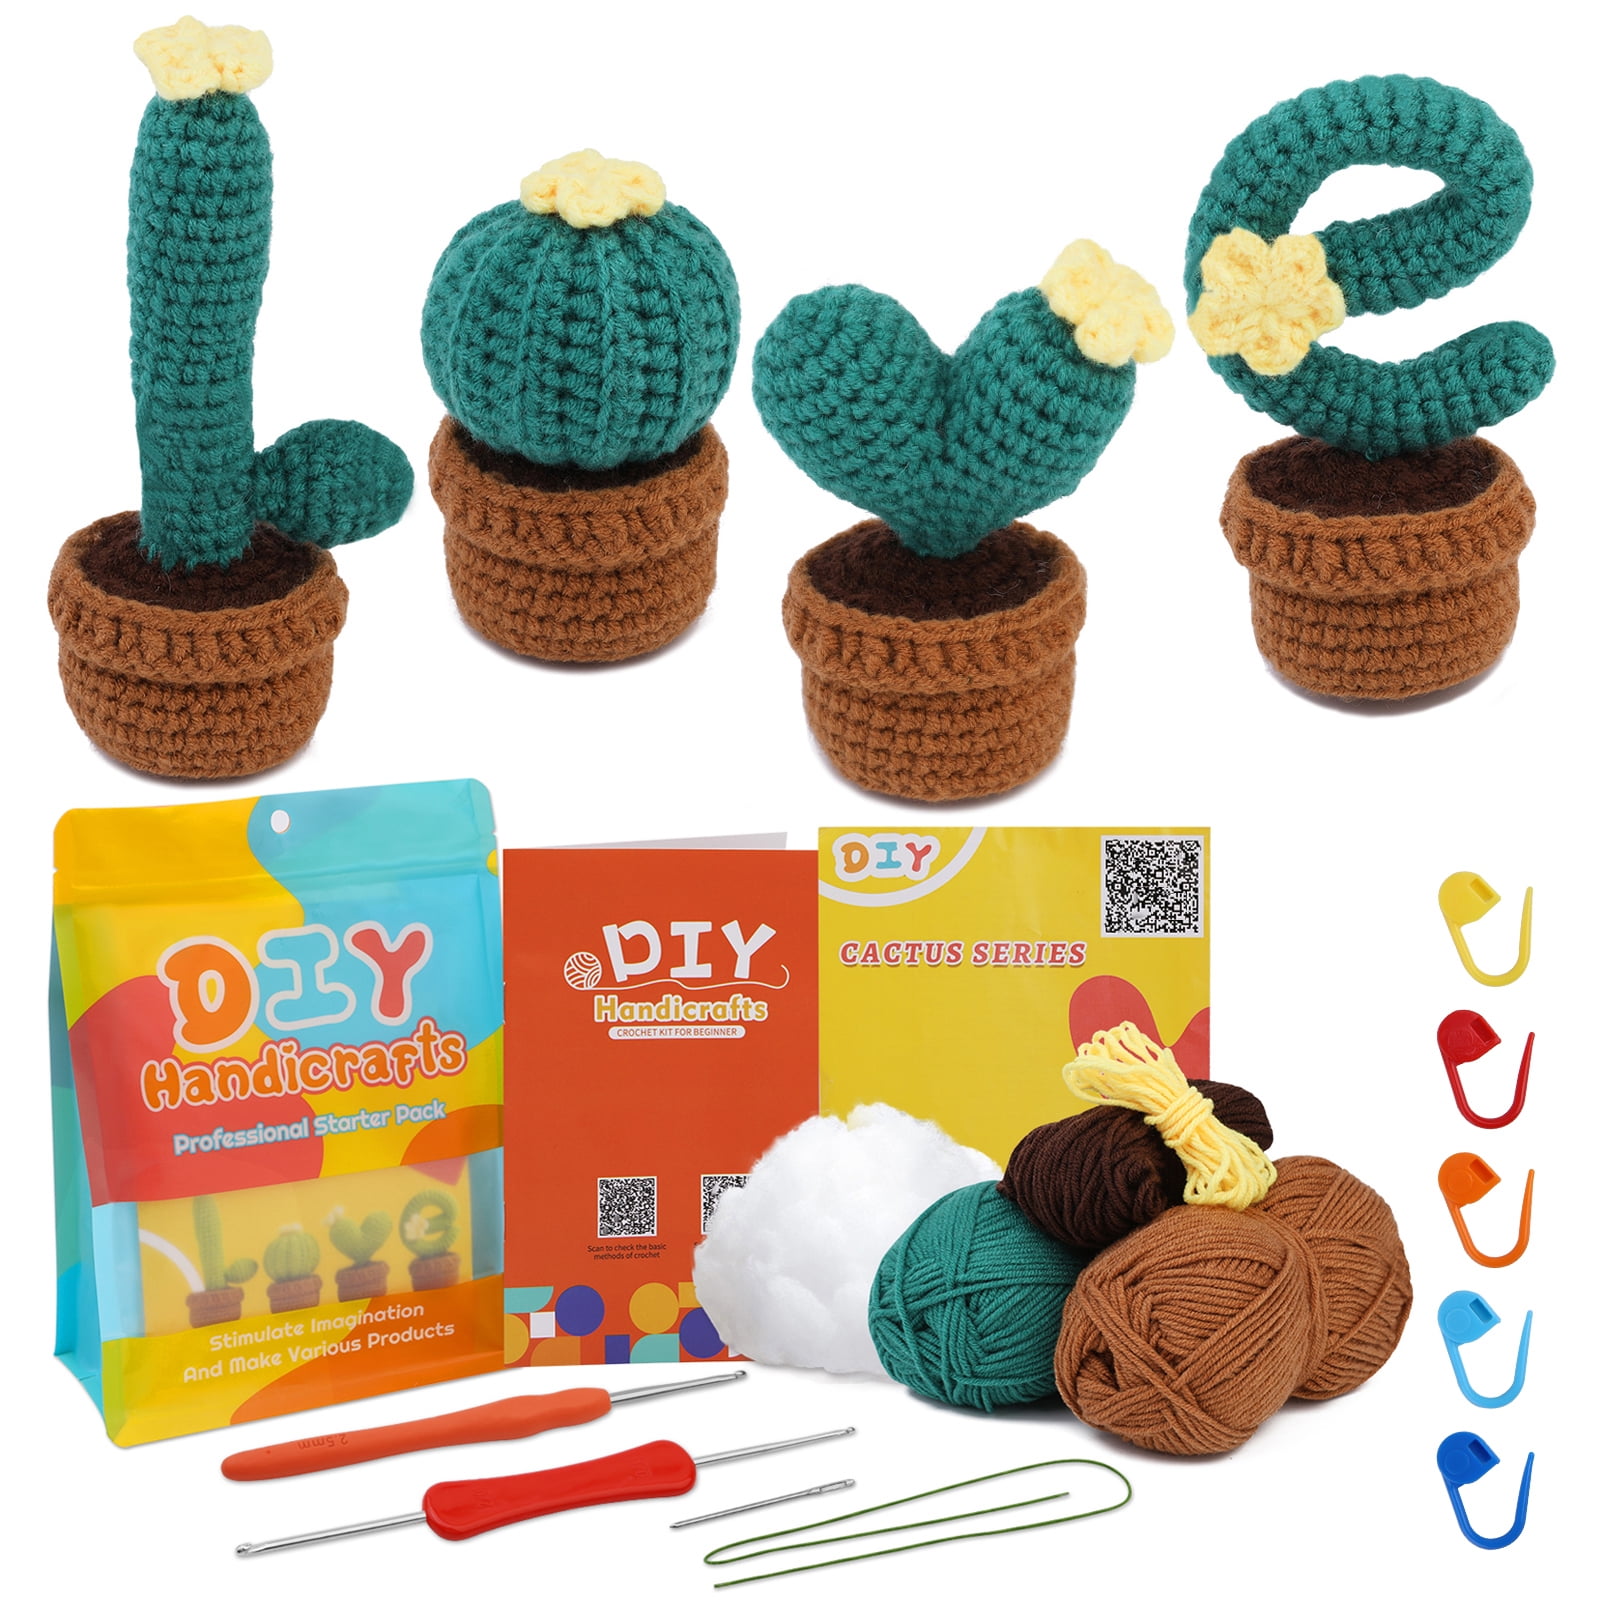 UzecPk Beginners Crochet Kit, 4 Pack Cactus Crochet Kit for Beginers and  Experts, All in One Crochet Knitting Kit with Step-by-Step Instructions  Video and Yarn(Light Green) 